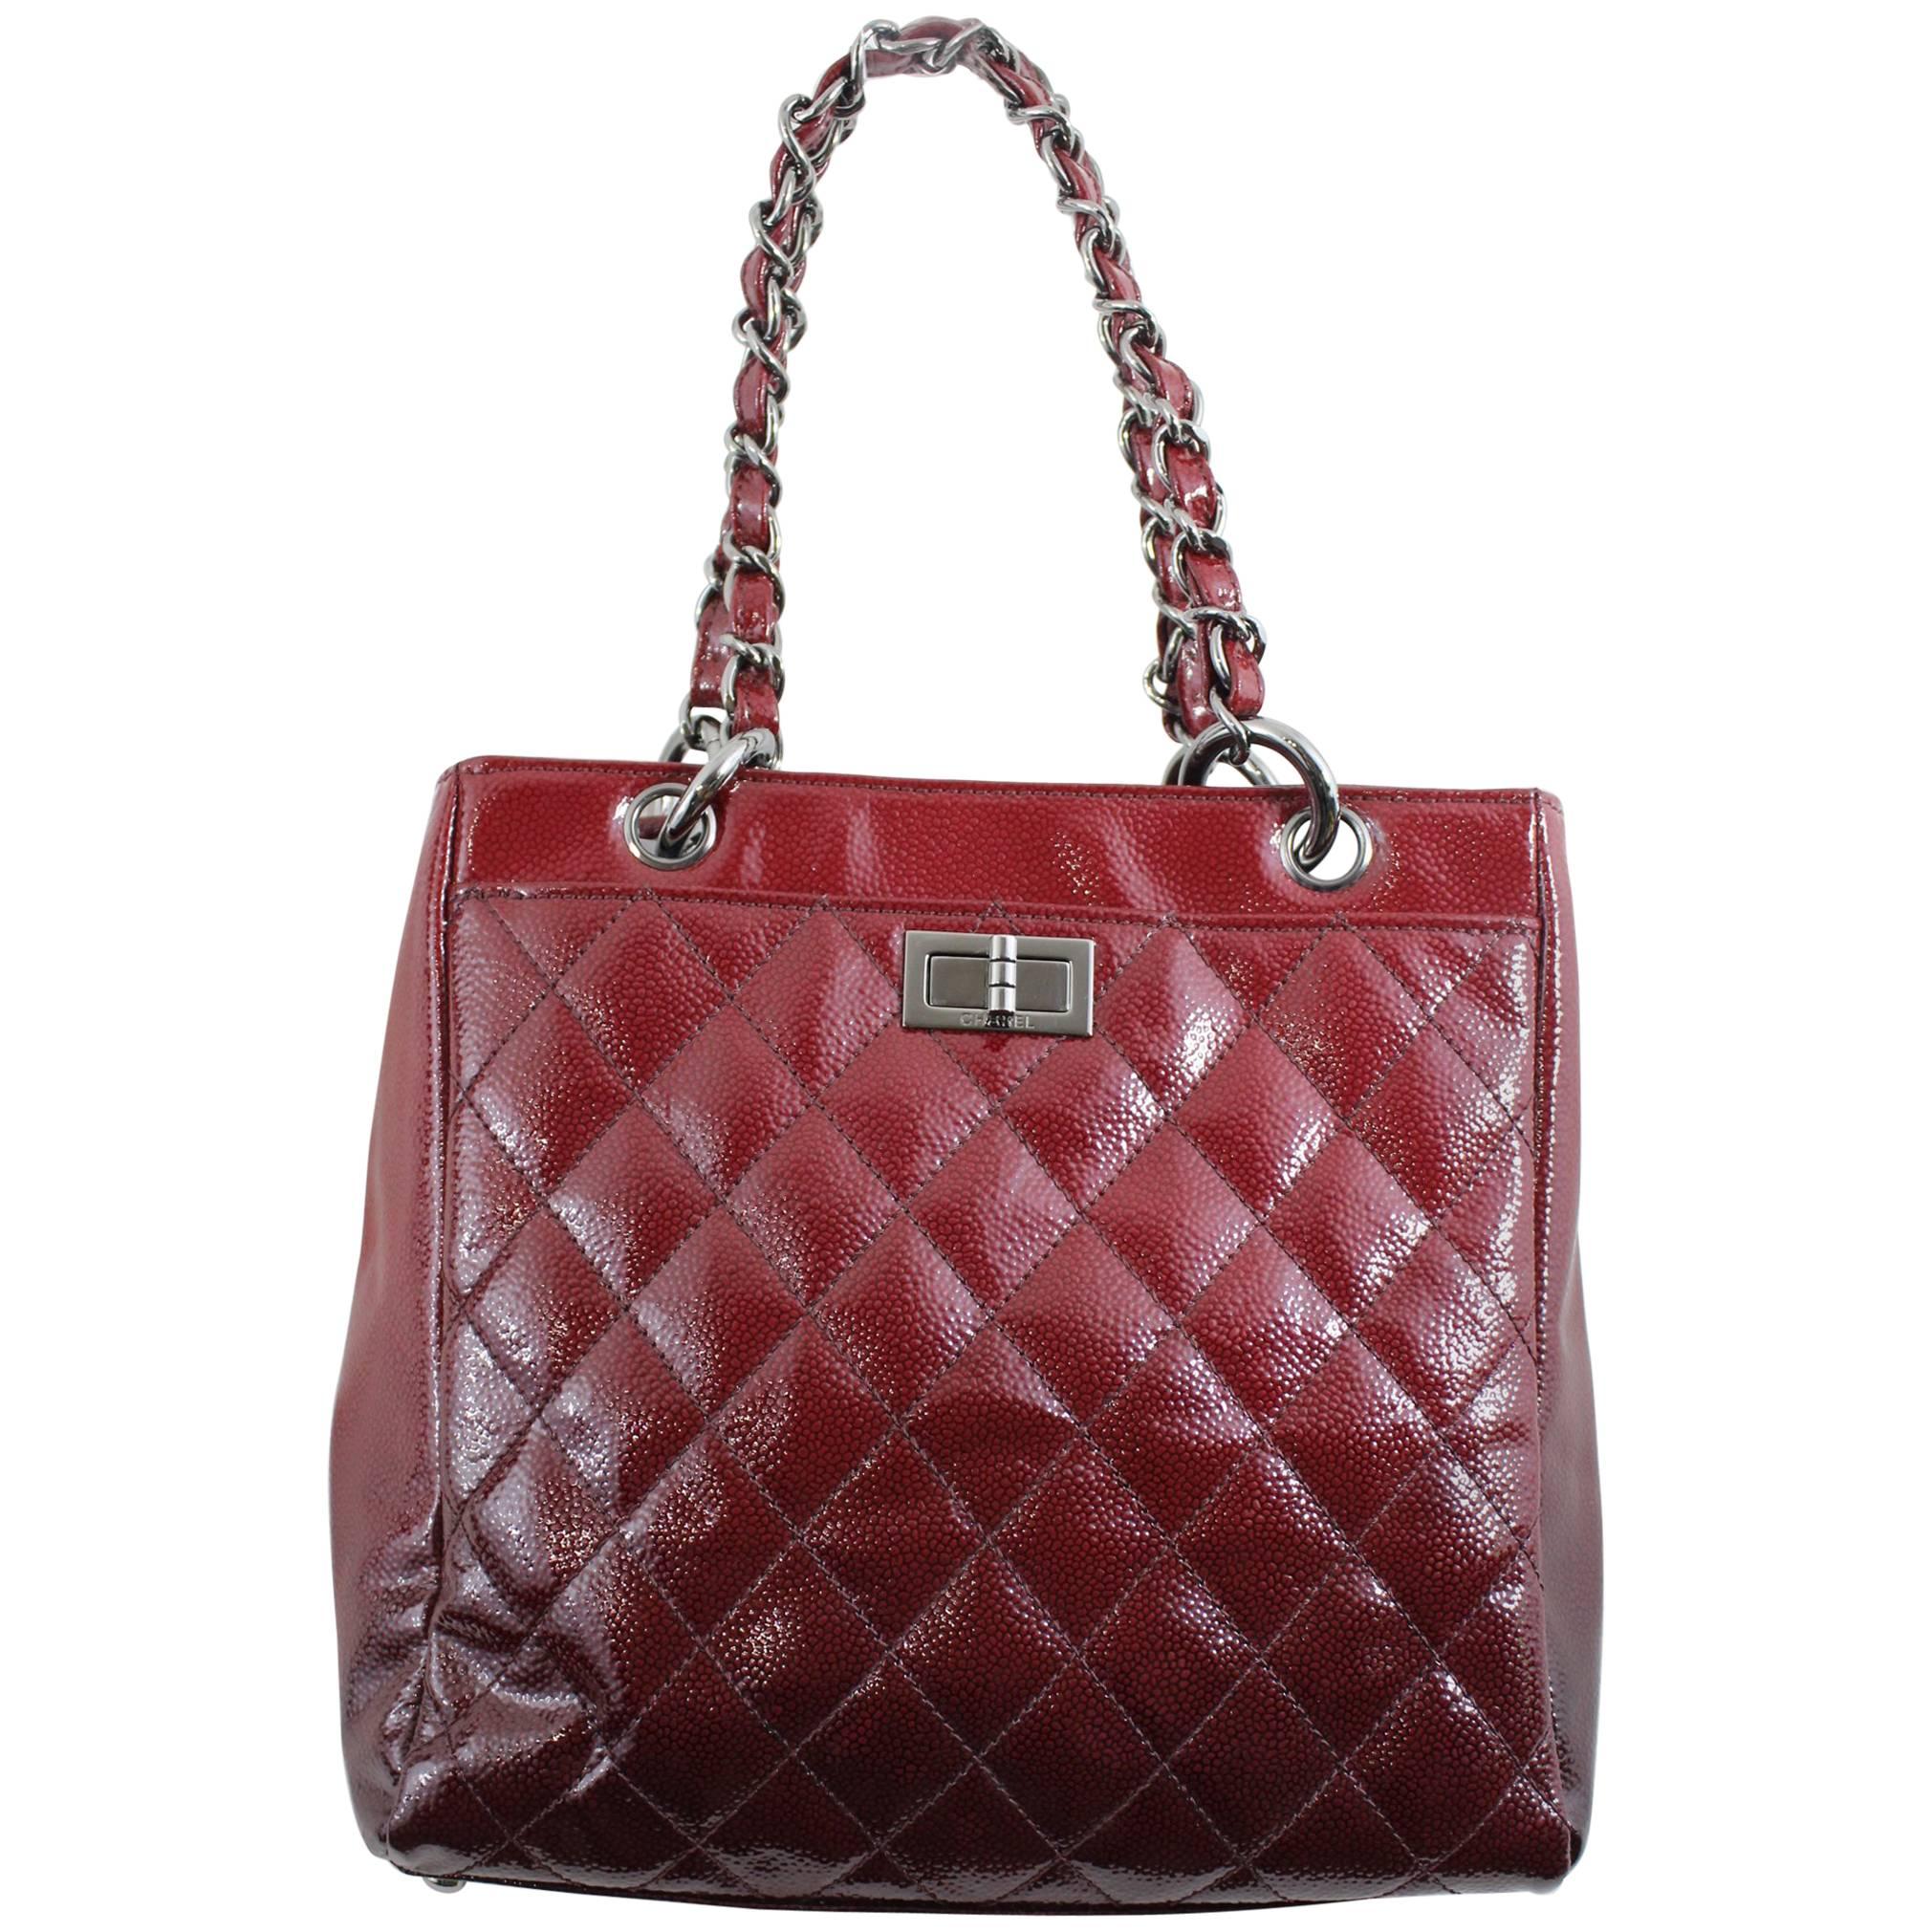 Chanel 2.55 patented Leather Burgundy-Red Shopper Bag For Sale